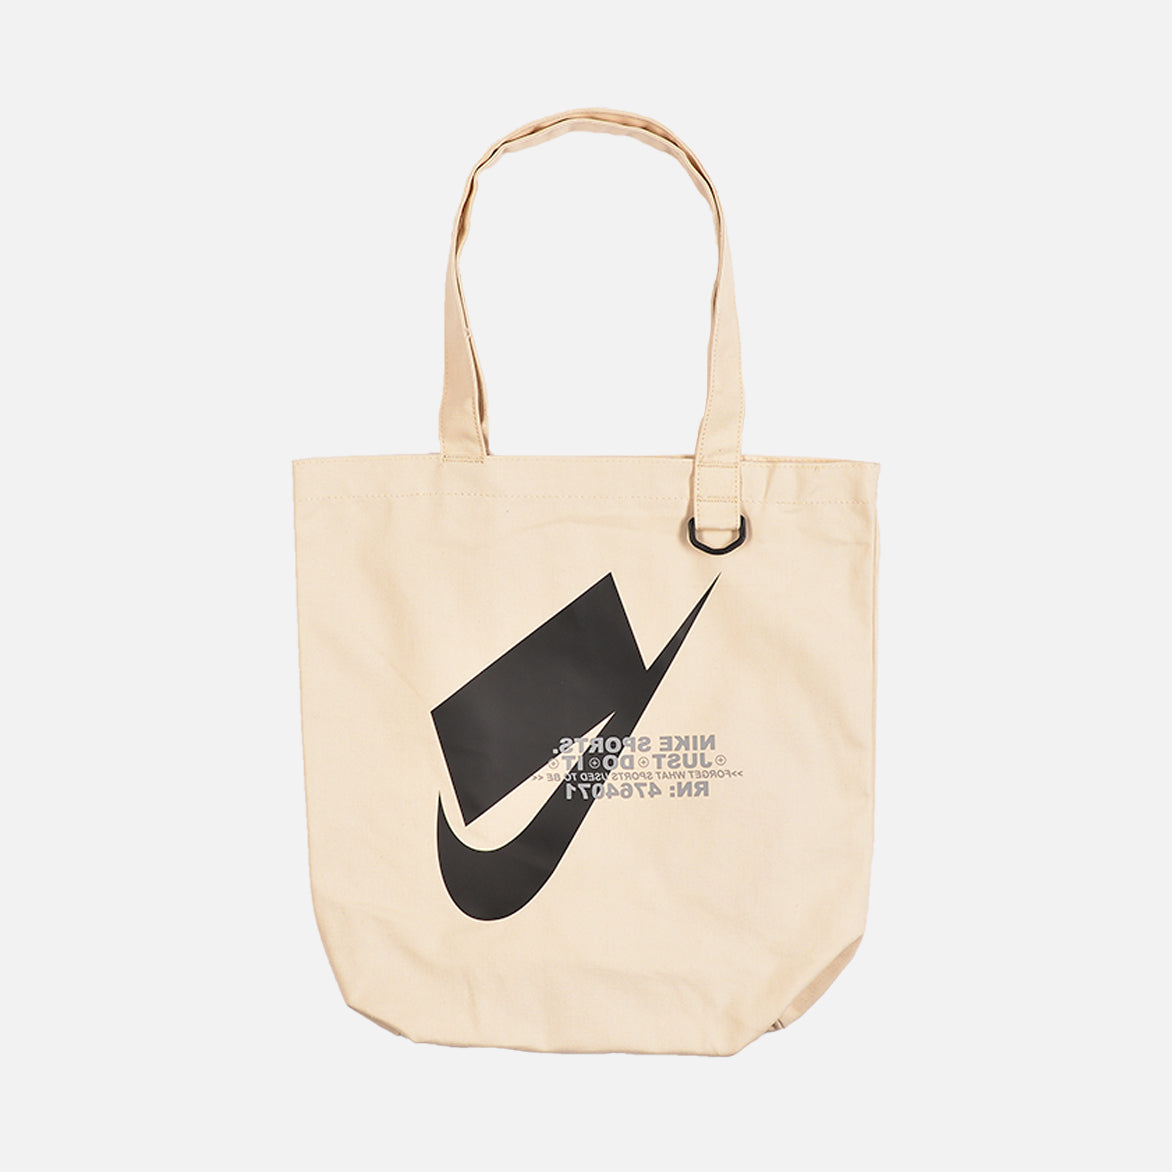 Nike Women's Wineb's Heritage Tote Blank Natural/Natural by Proozy